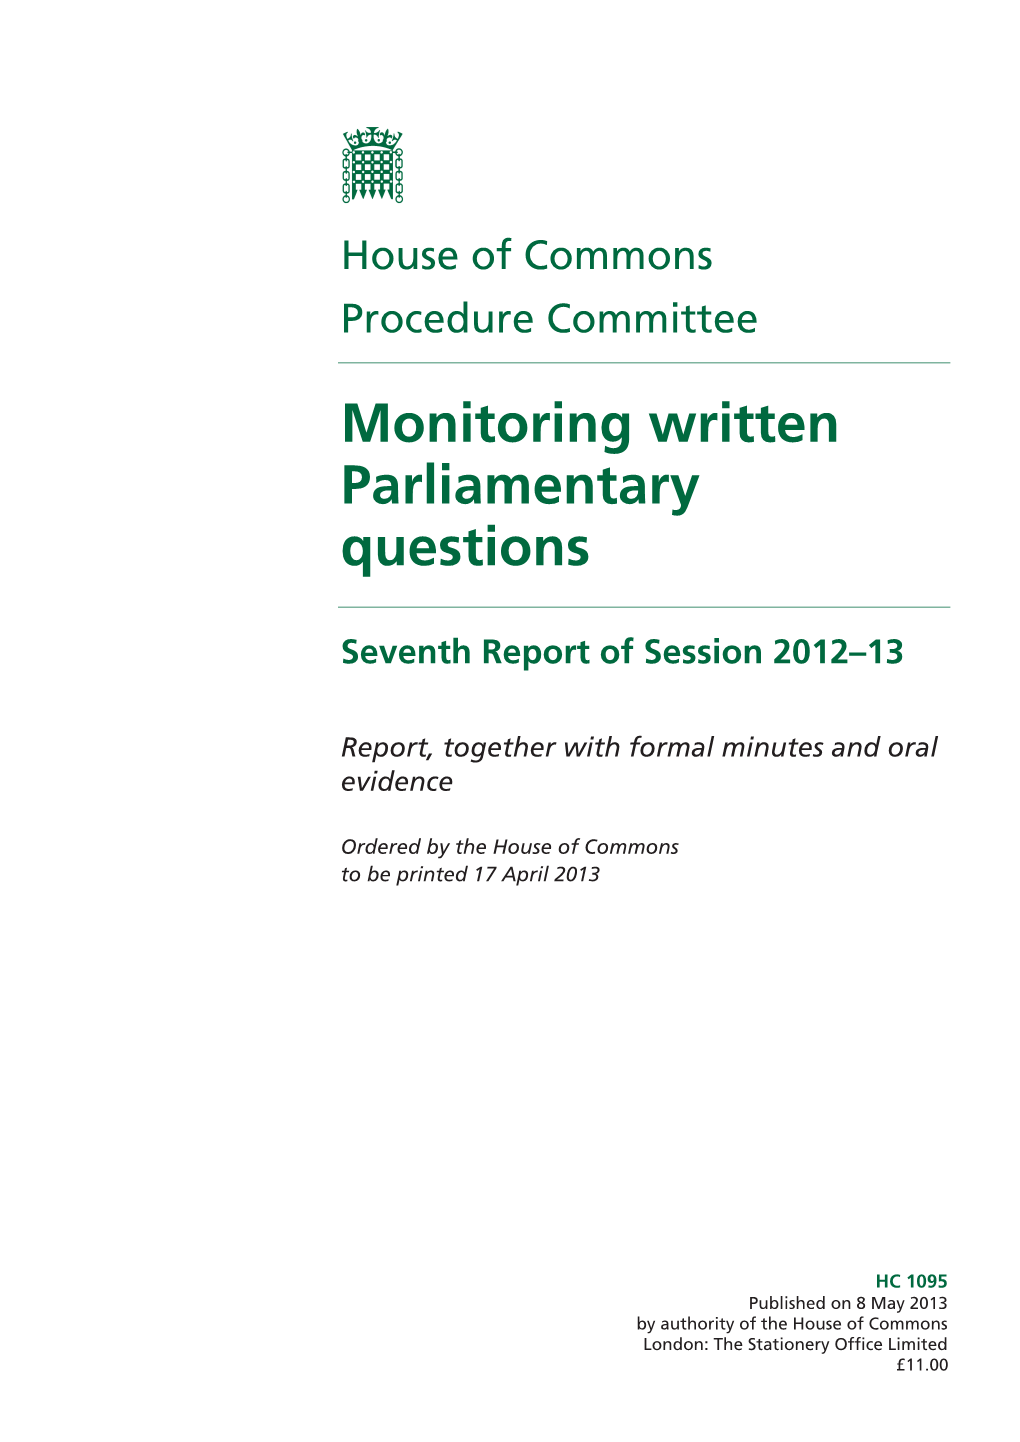 Monitoring Written Parliamentary Questions